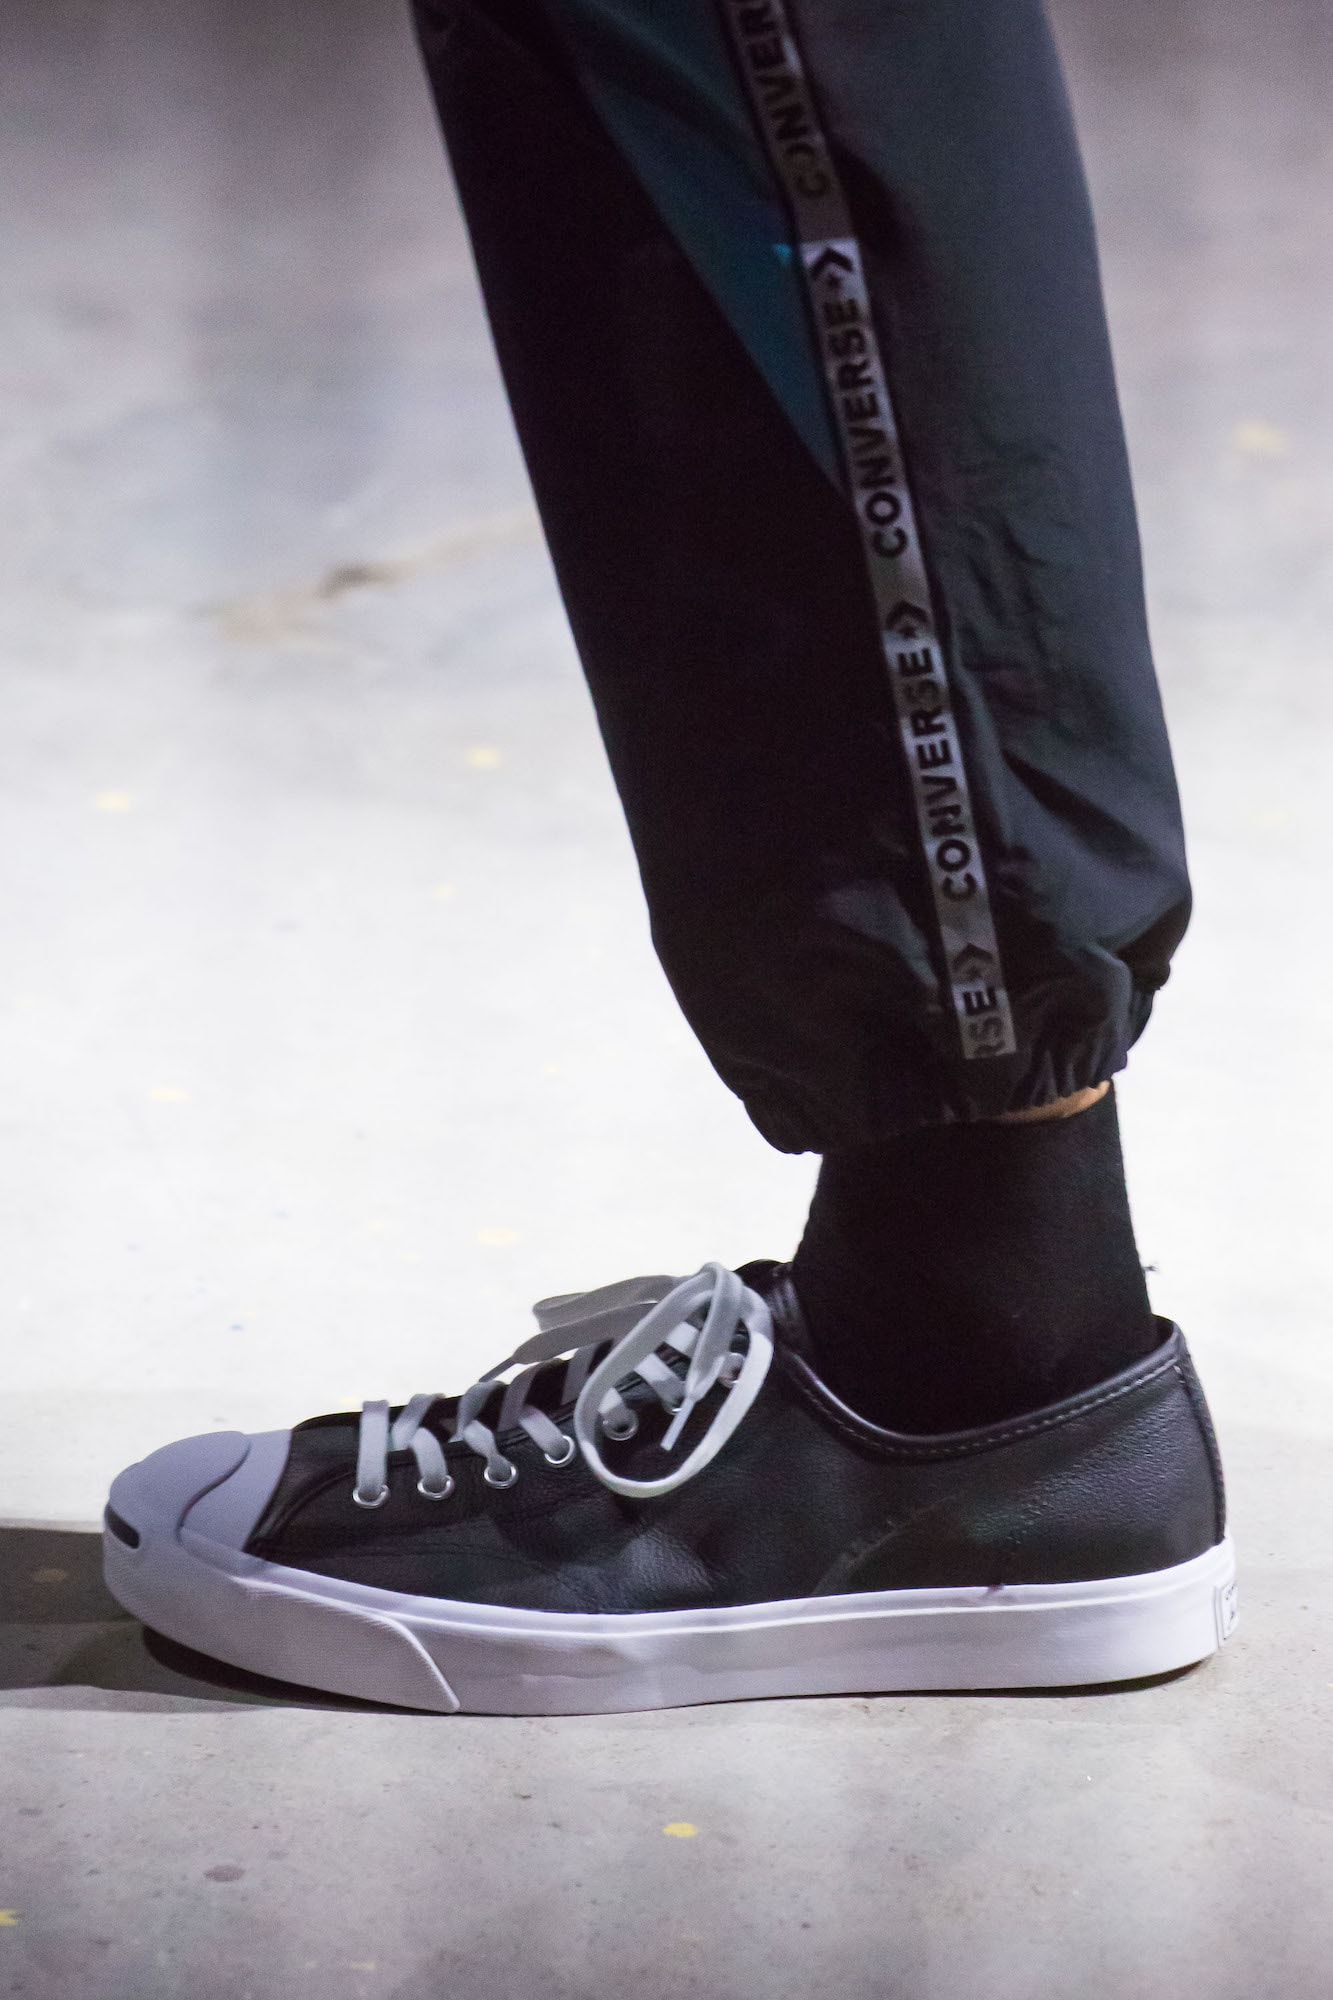 Feng Chen Wang Debuts New Converse Collaboration Shanghai Fashion Week Runway Collection Sneaker Shoe White Black Chuck Taylor One Star Jack Purcell